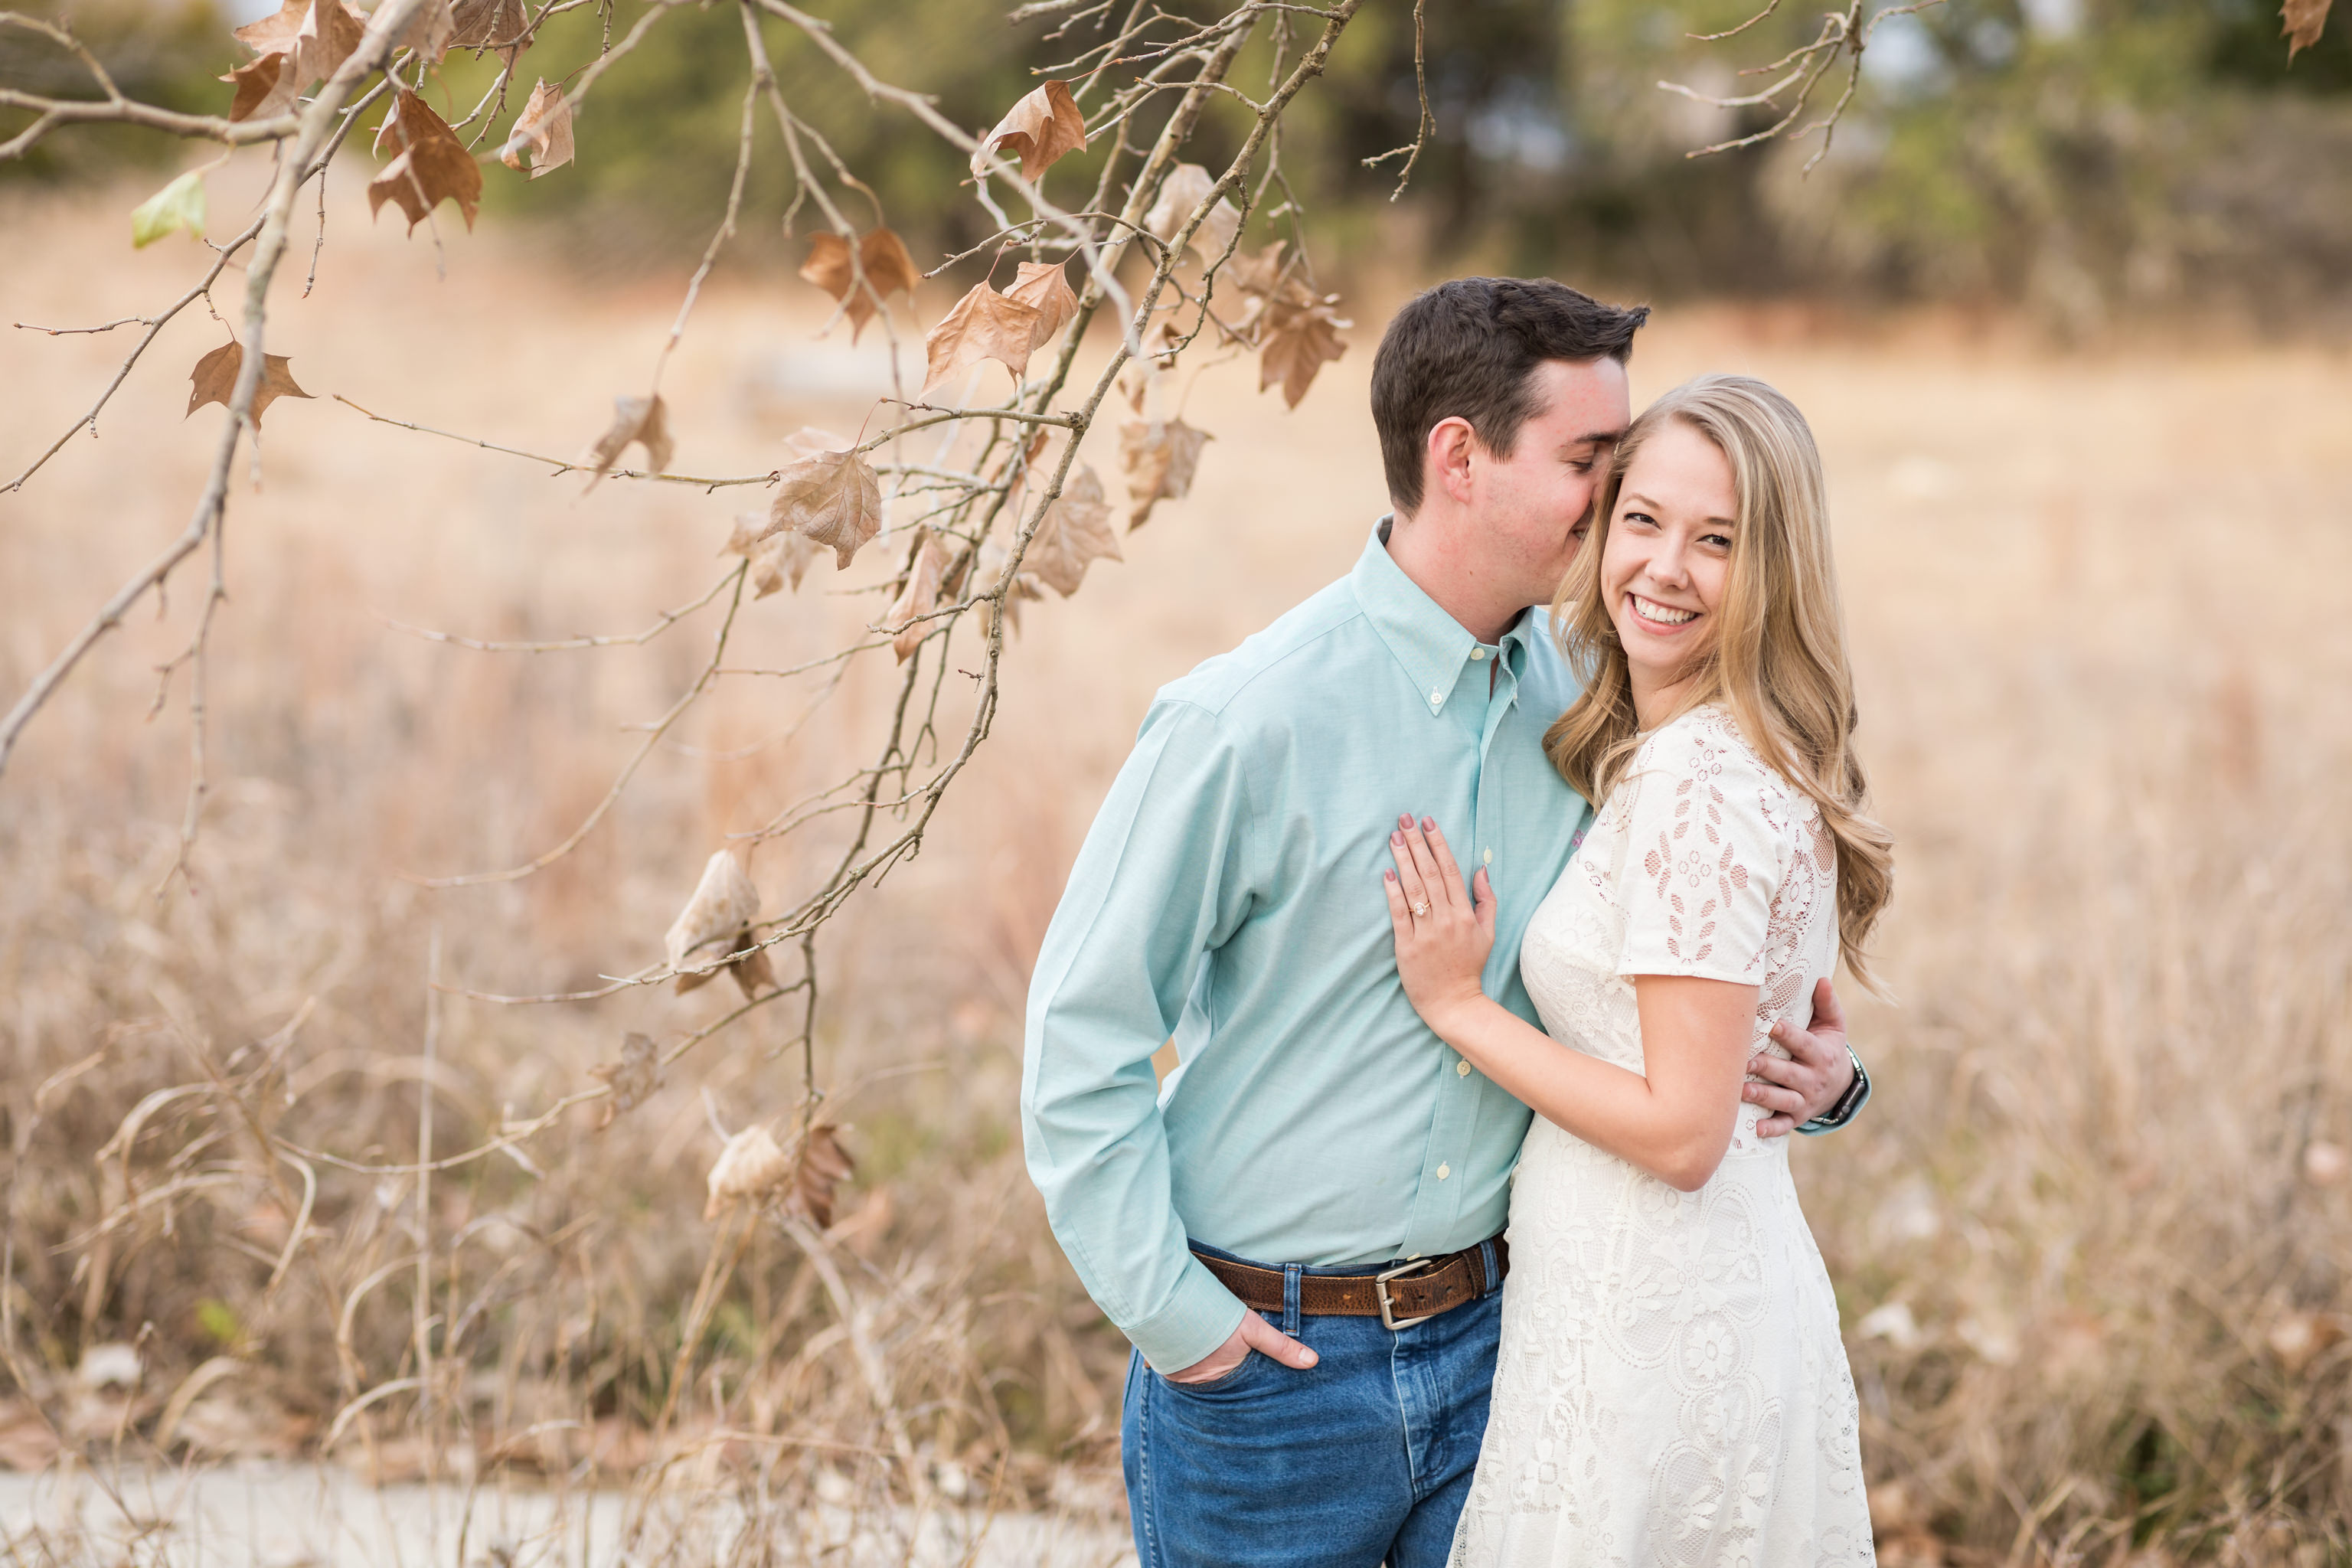 An Engagement Session at Cibolo Nature Center in Boerne, TX by Dawn Elizabeth Studios, San Anotnio Wedding Photographer